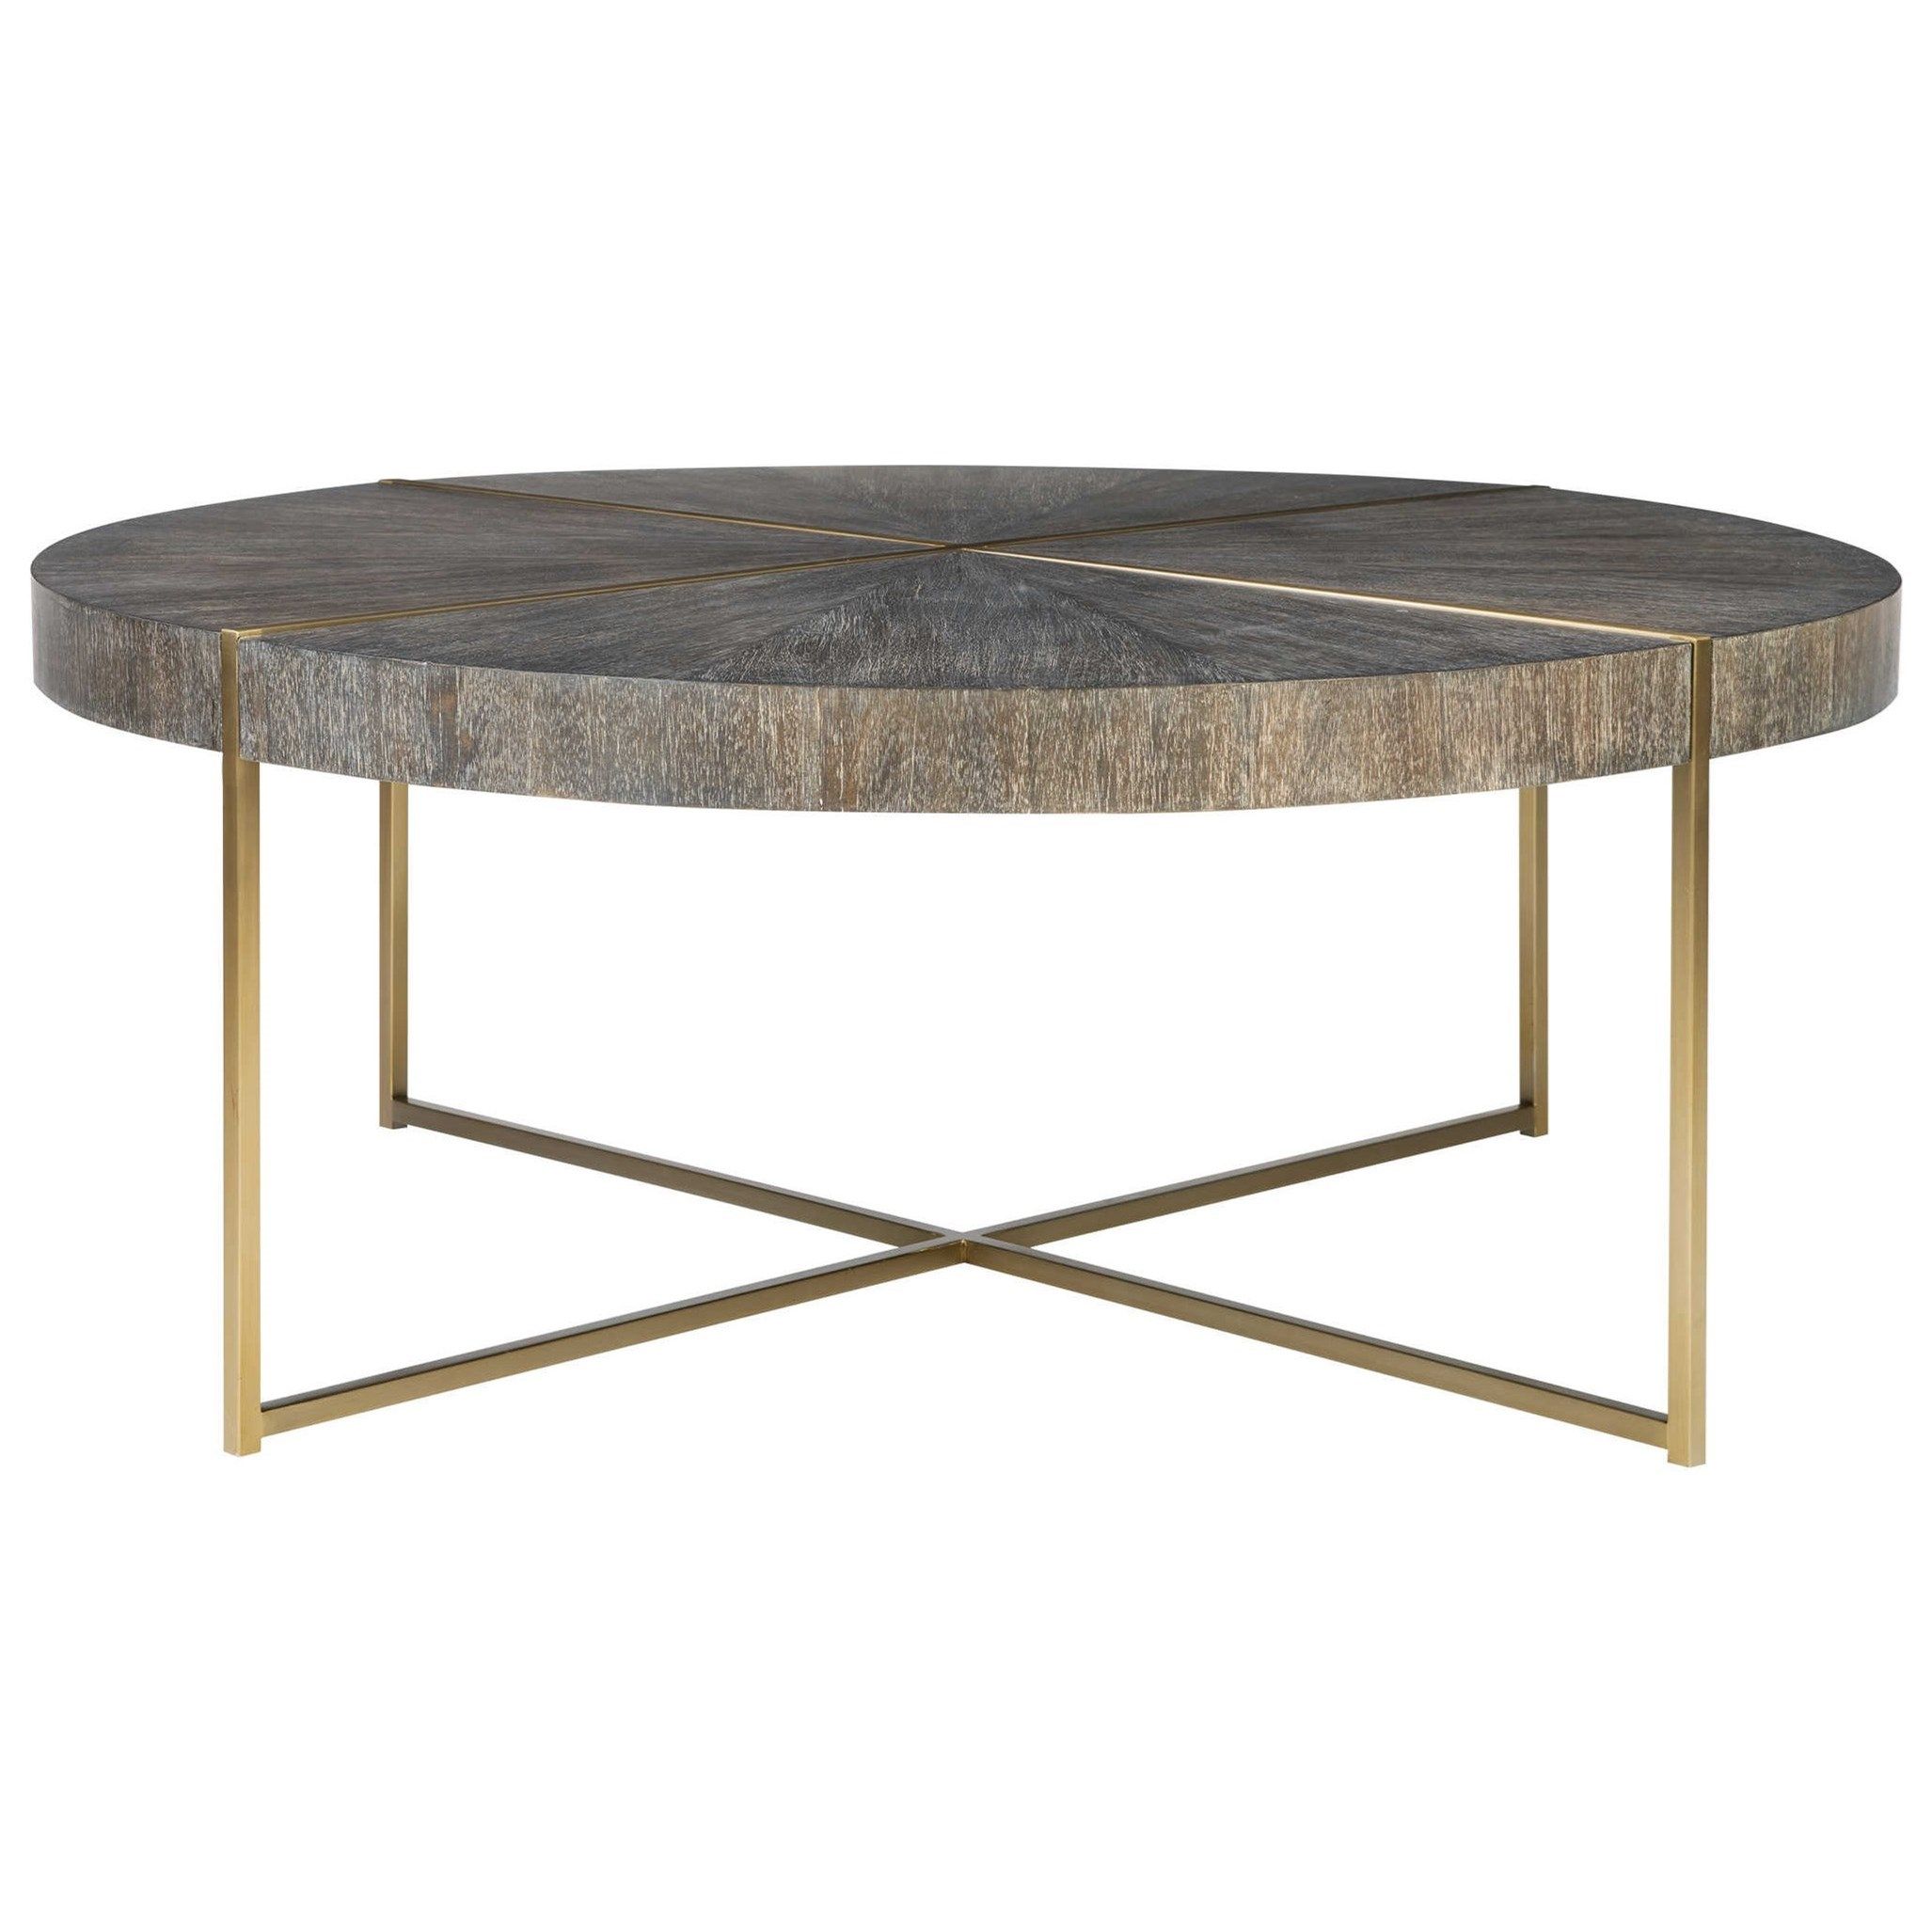 Uttermost Accent Furniture – Occasional Tables Taja Round Coffee Table Regarding Occasional Coffee Tables (Gallery 11 of 20)